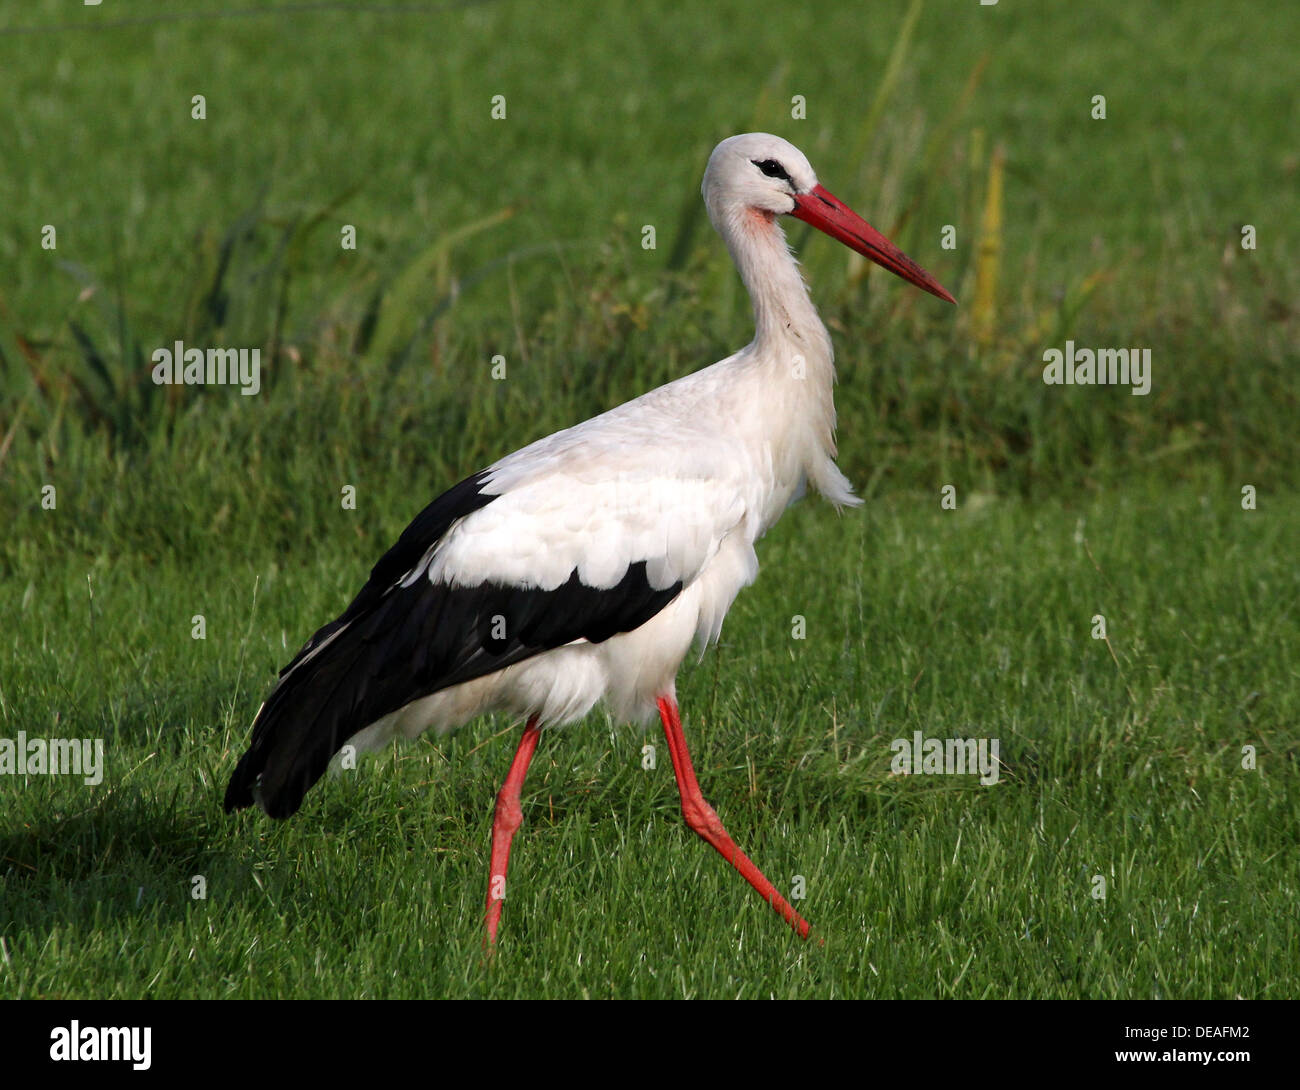 Mature White Stork (Ciconia ciconia) walking in the grass Stock Photo